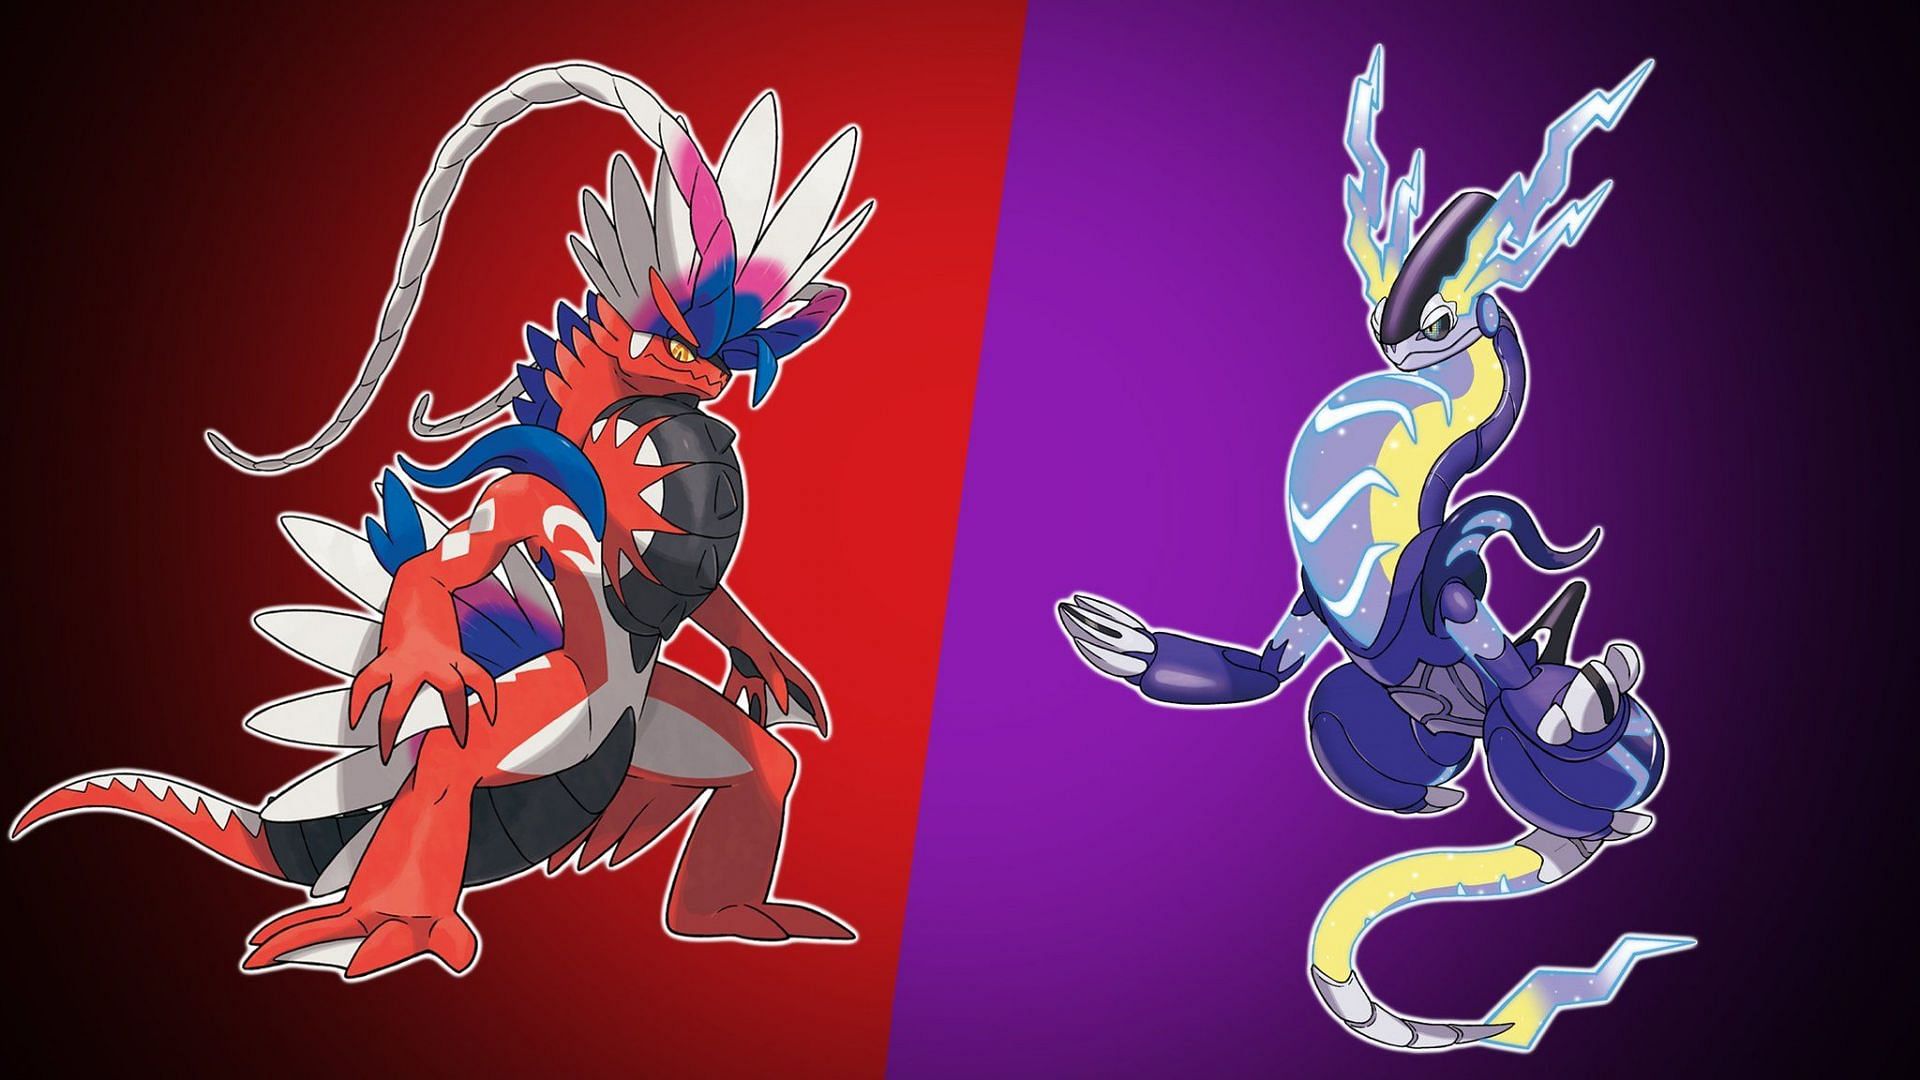 Official artwork for Pokemon Scarlet and Violet depicting the two main Legendary Pokemon for the games (Image via The Pokemon Company)